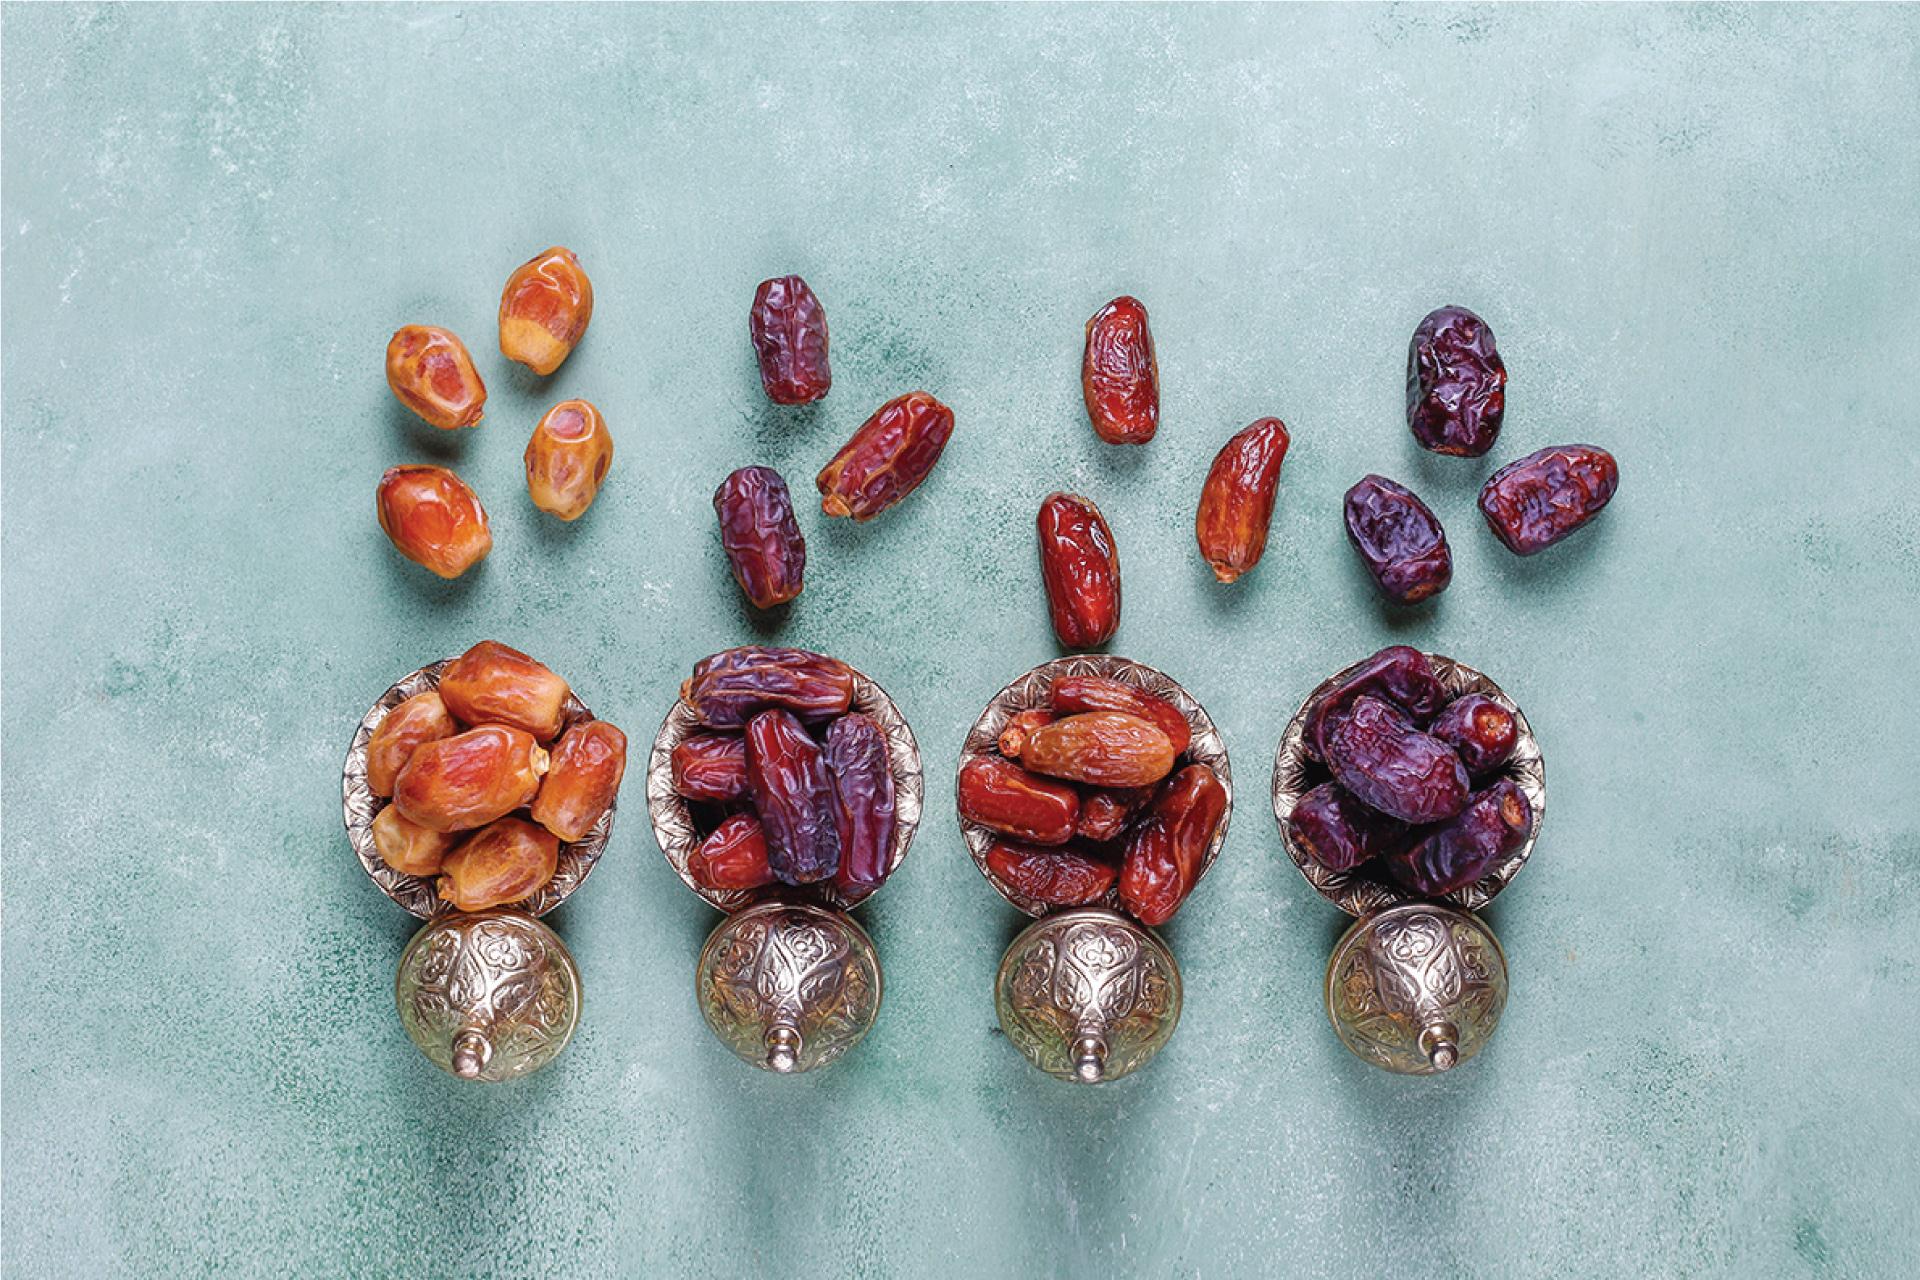 Check Out the Benefits of Dates and Delicious Recipes Here